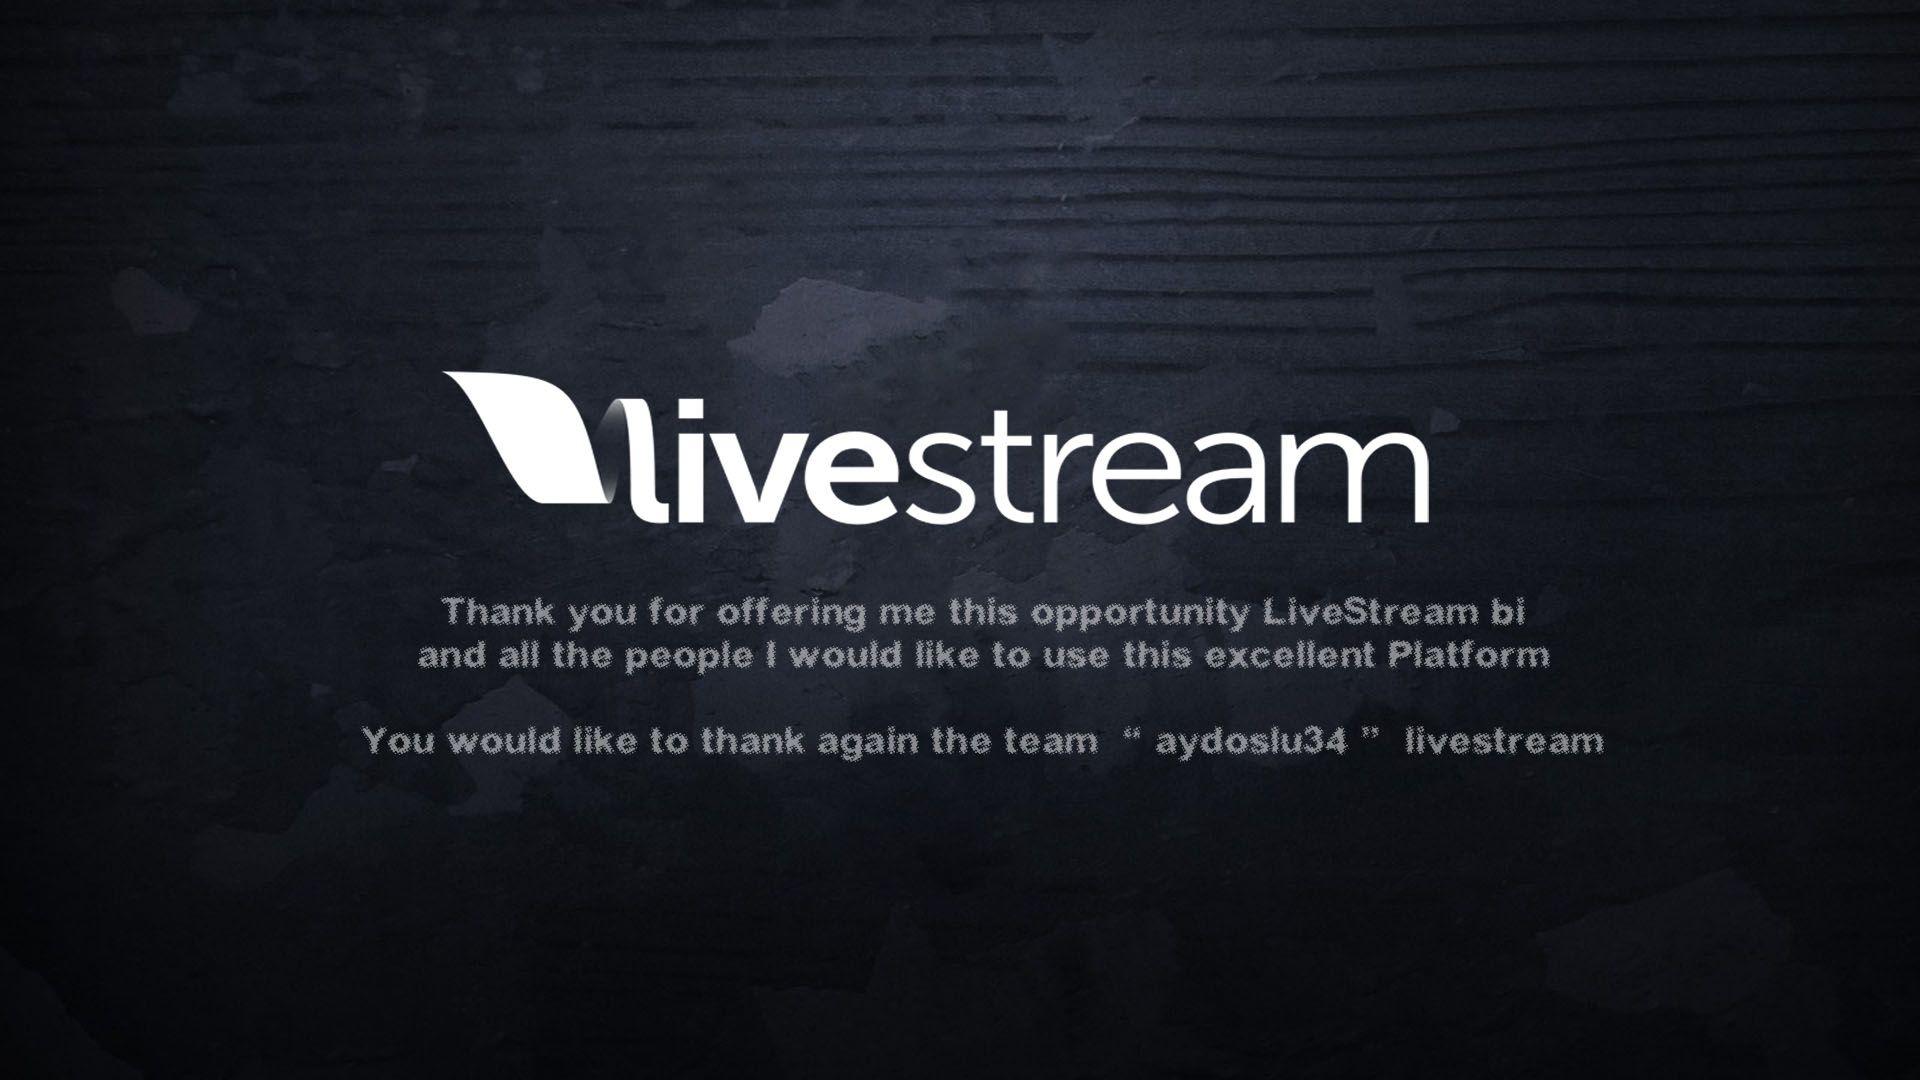 Live Stream Wallpapers Top Free Live Stream Backgrounds Wallpaperaccess